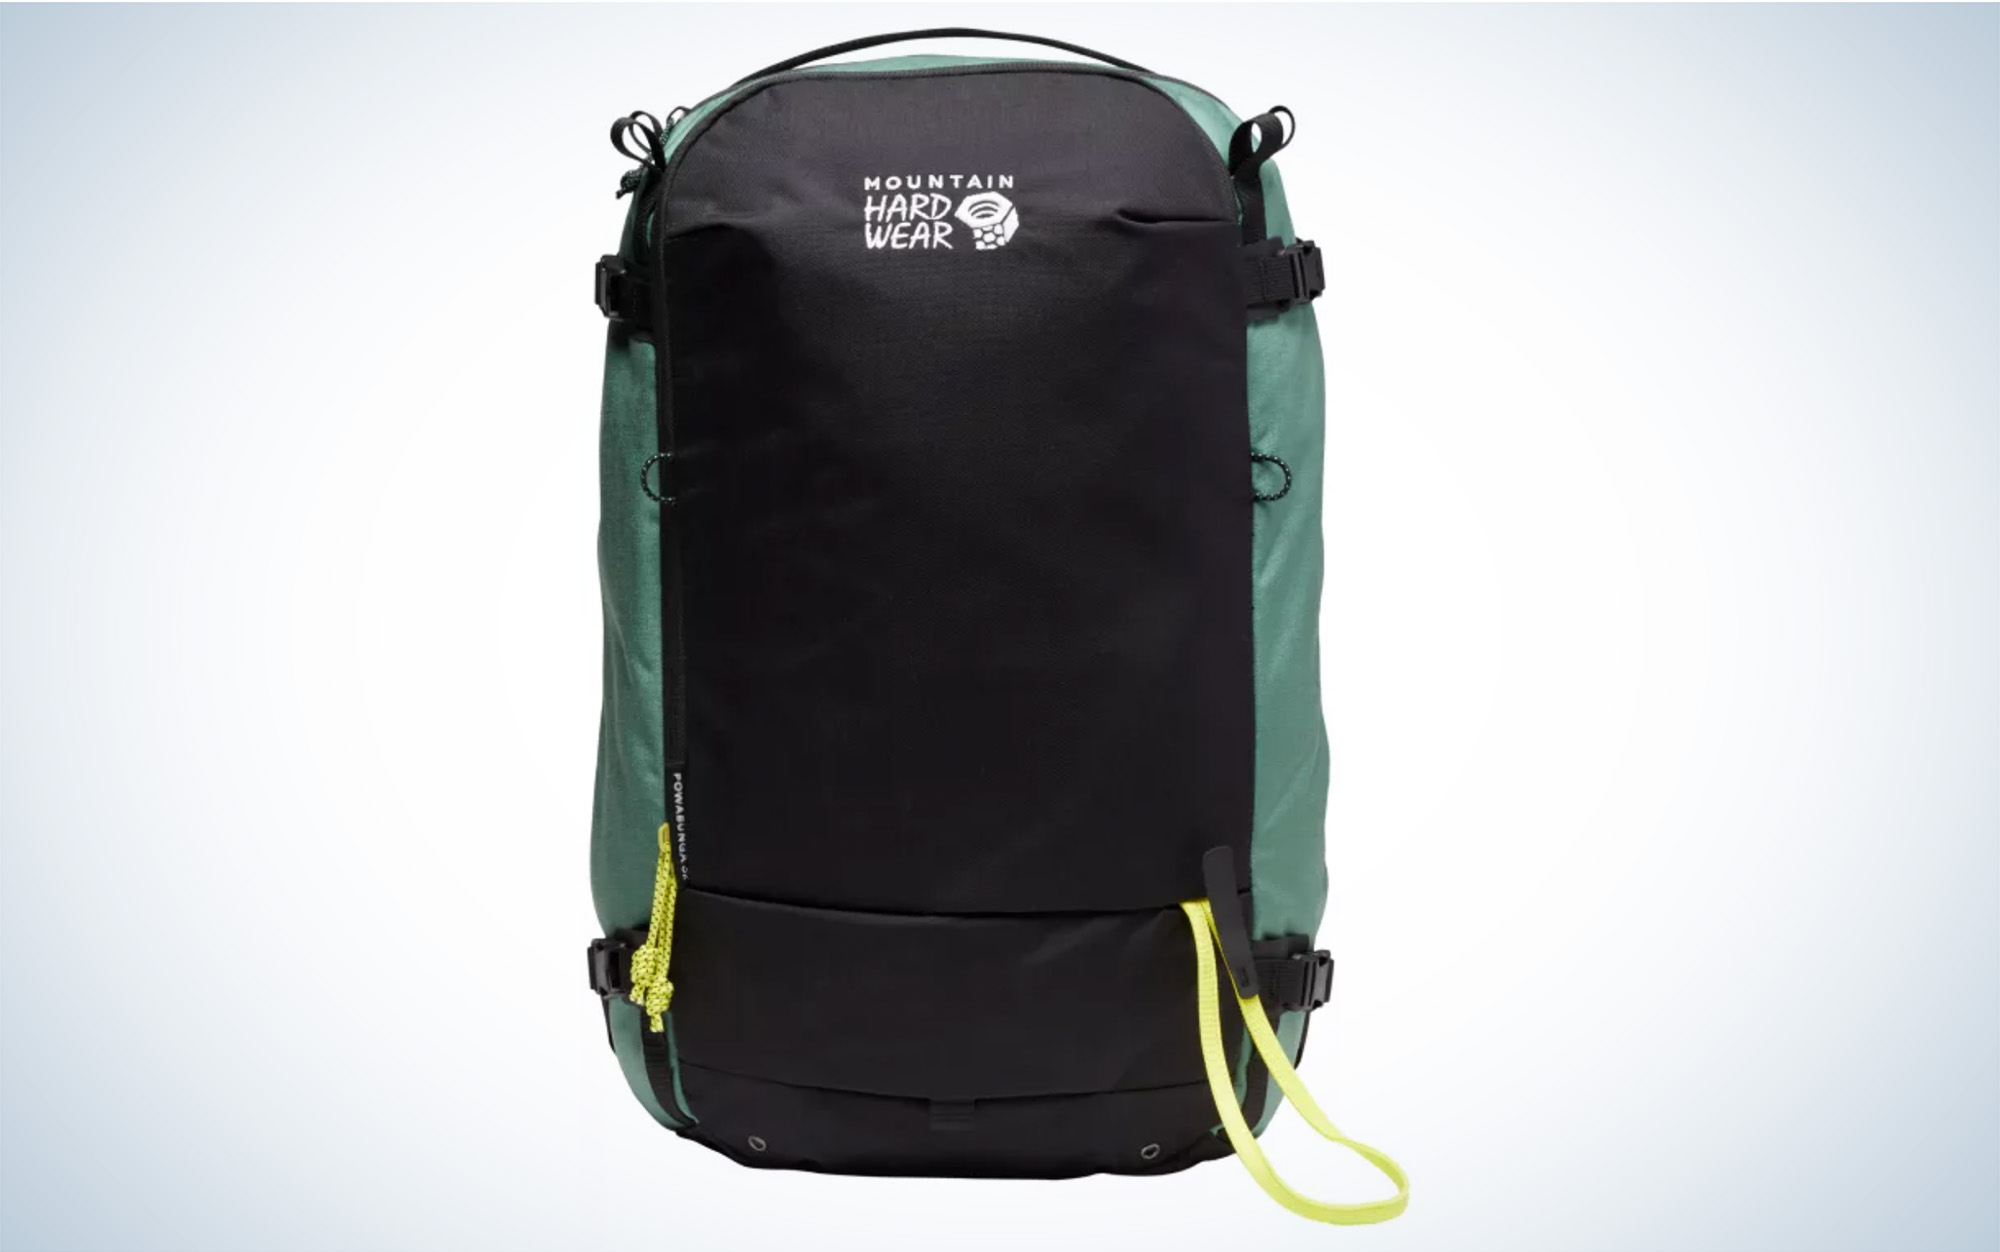 BW Backpack Mountain 100 L olive | BW Backpack Mountain 100 L olive |  Backpacks | Backpacks | Transport